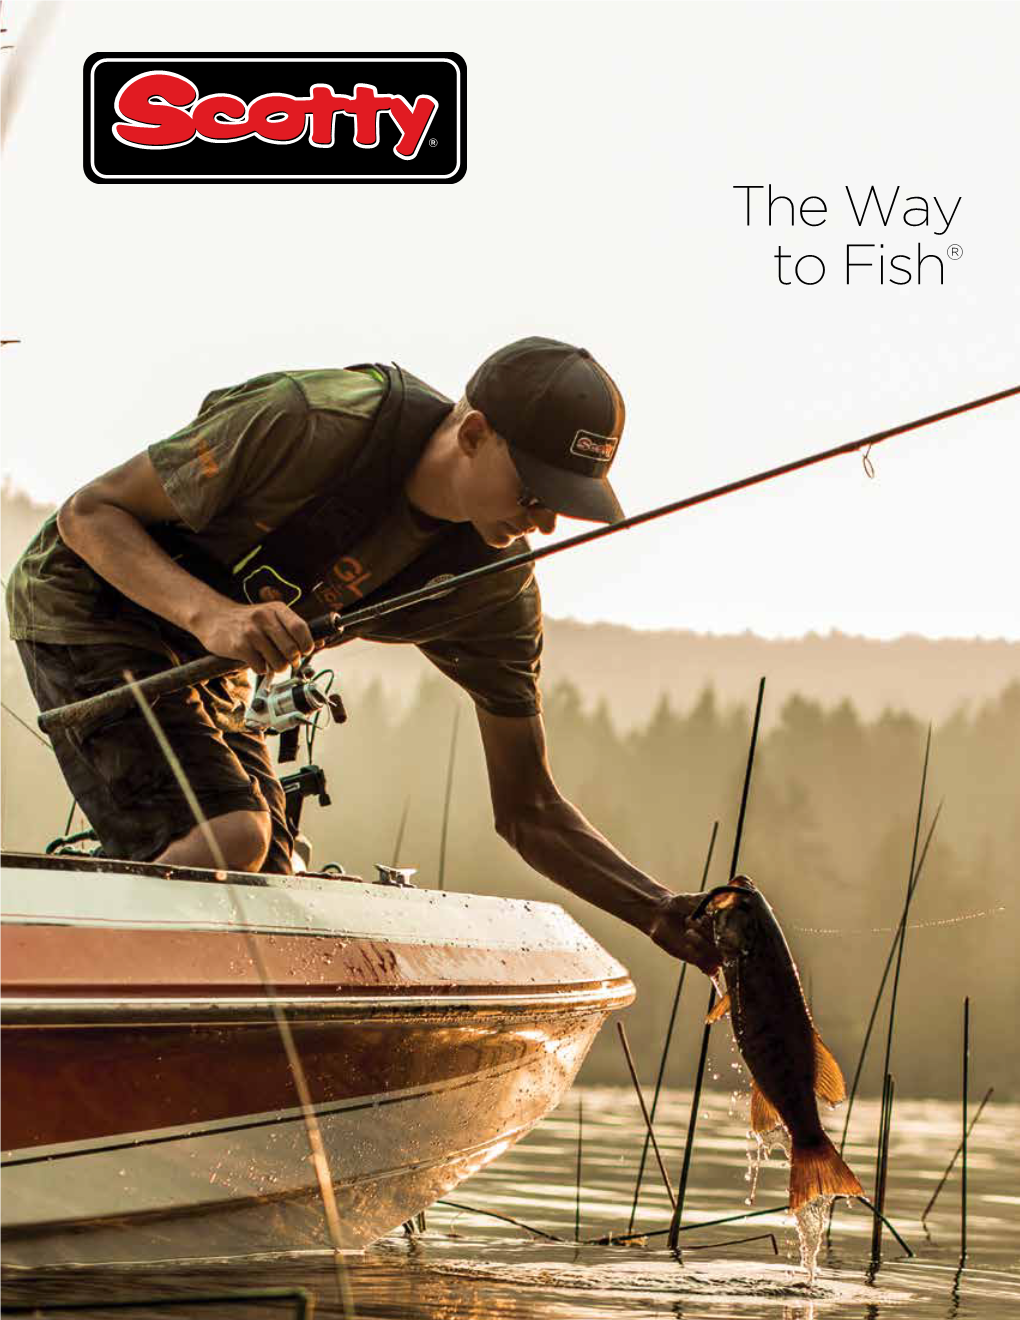 The Way to Fish® SINCE 1952 YEARS of QUALITY, INNOVATION and CUSTOMER SERVICE a Family Business for Over 66 Years, Scott Plastics Ltd